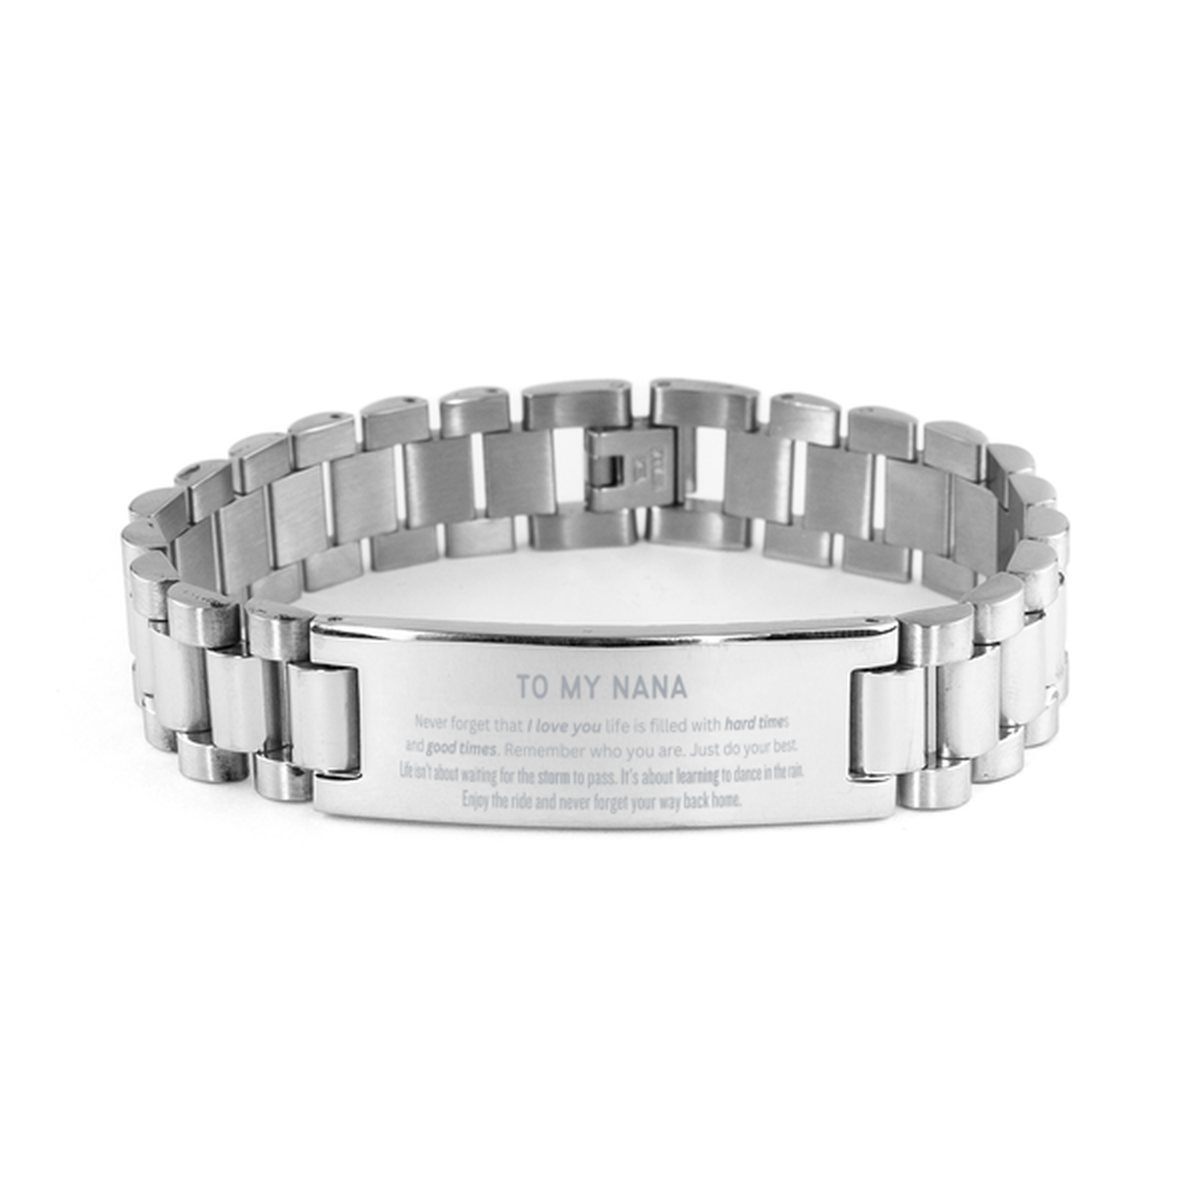 Christmas Nana Ladder Stainless Steel Bracelet Gifts, To My Nana Birthday Thank You Gifts For Nana, Graduation Unique Gifts For Nana To My Nana Never forget that I love you life is filled with hard times and good times. Remember who you are. Just do your